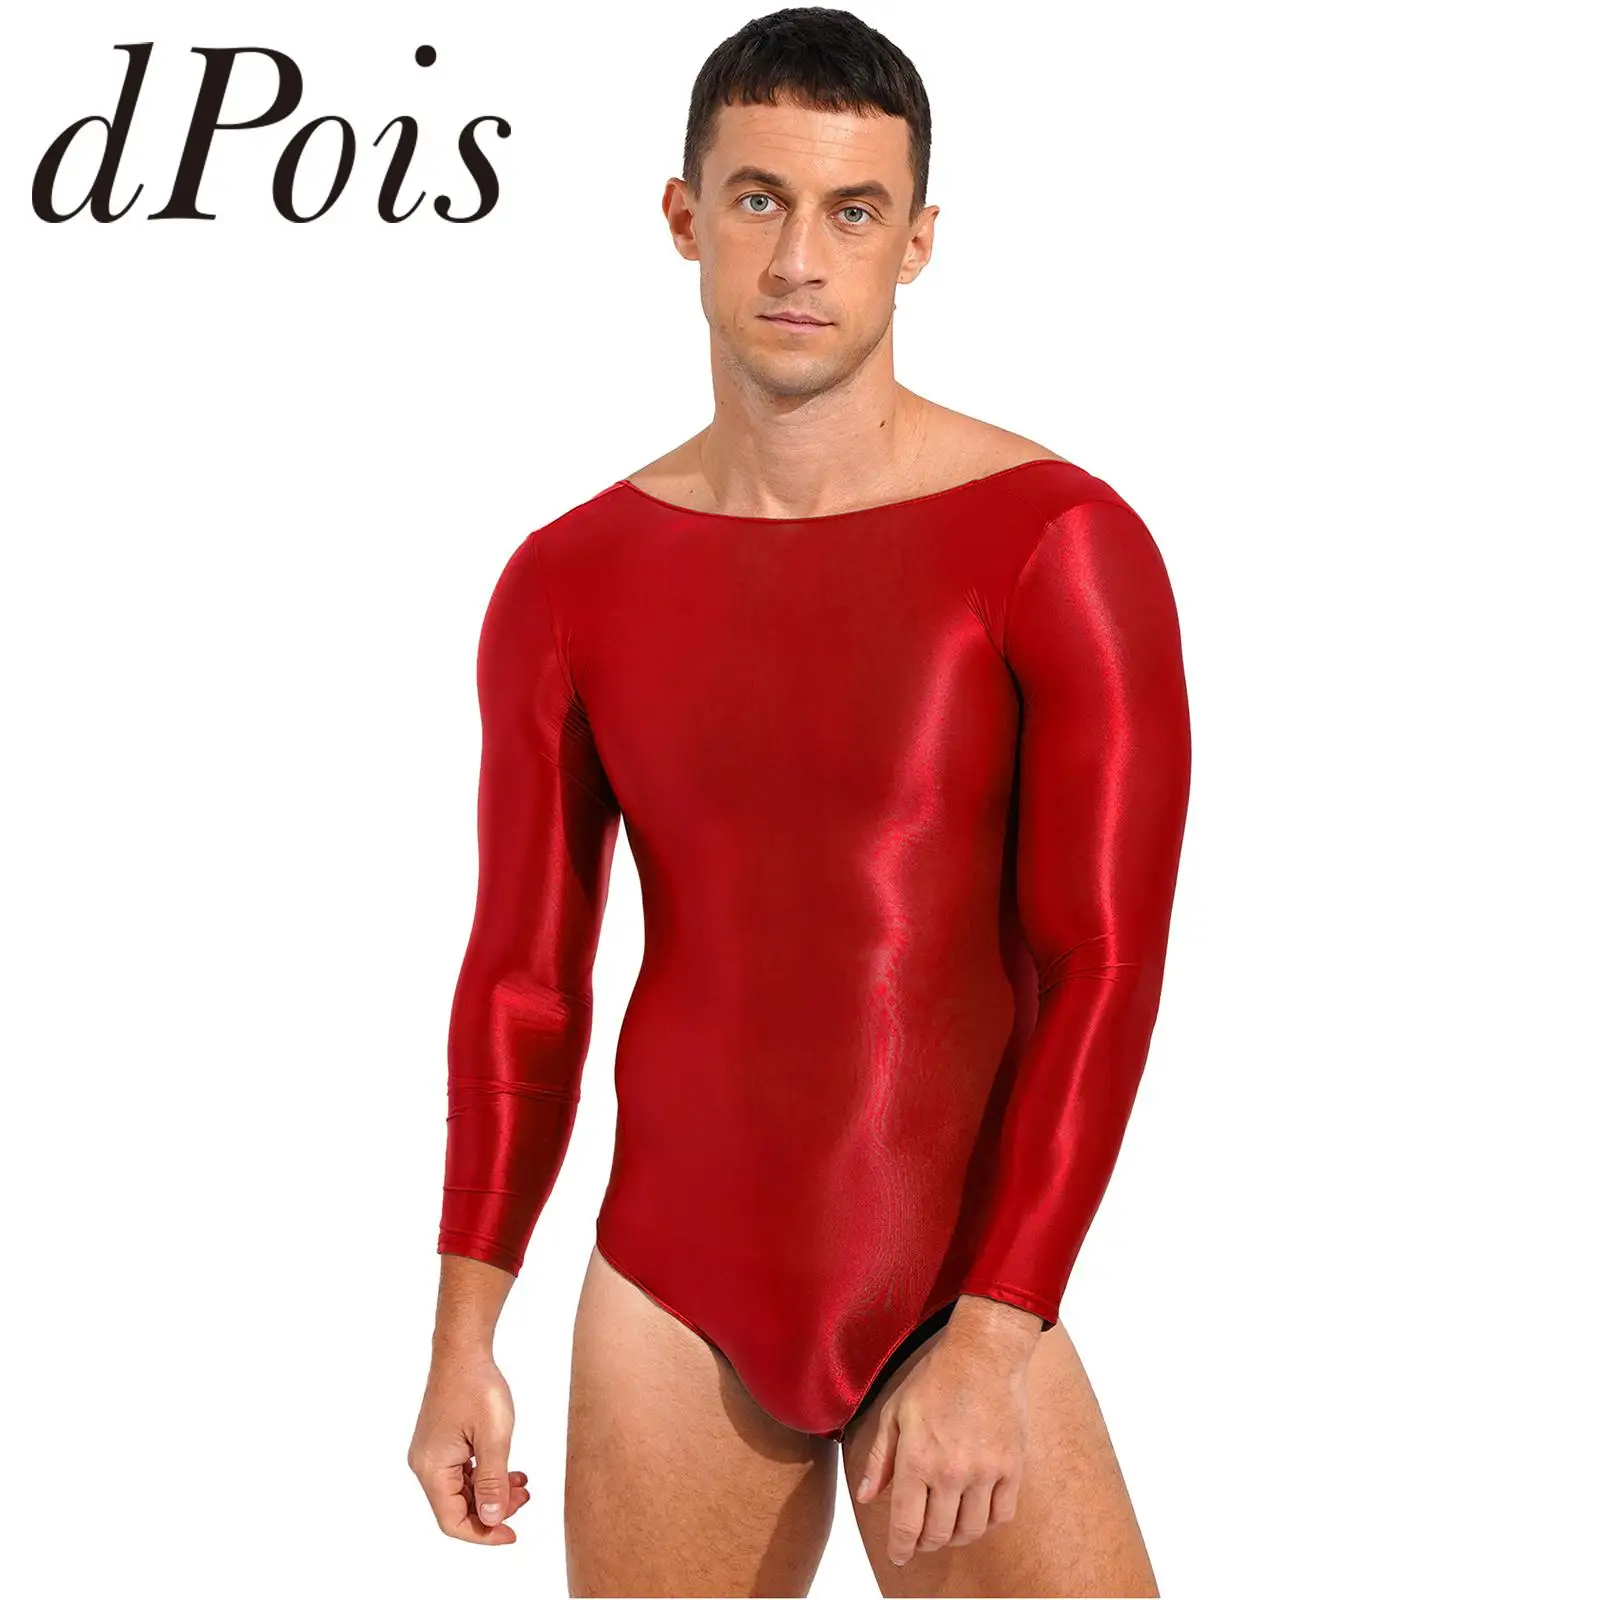 

Mens Glossy Bodysuit One Piece Lingerie Male Swimwear Stretchy Semi See Through Long Sleeve Backless Gymnastics Leotard Jumpsuit